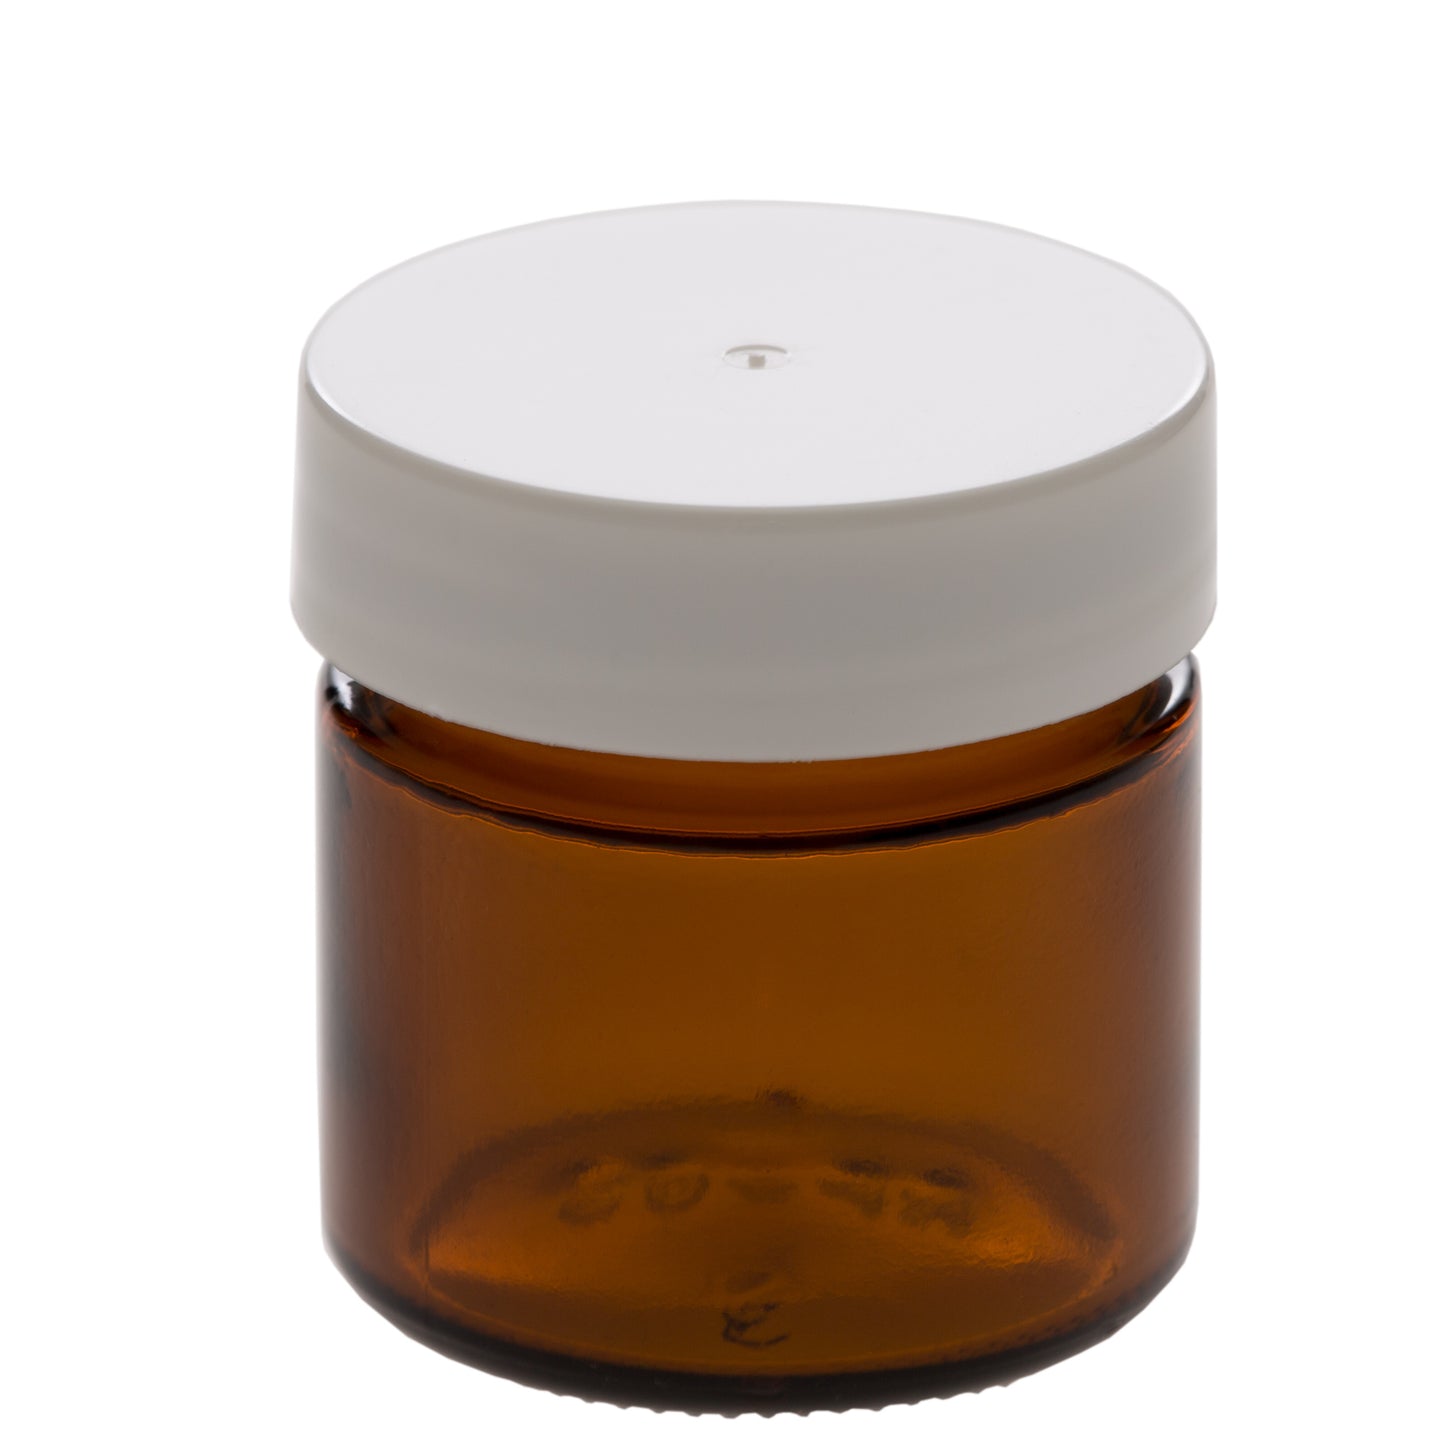 25 ml Amber Glass Jar with 38-400 White Gloss Smooth Cap